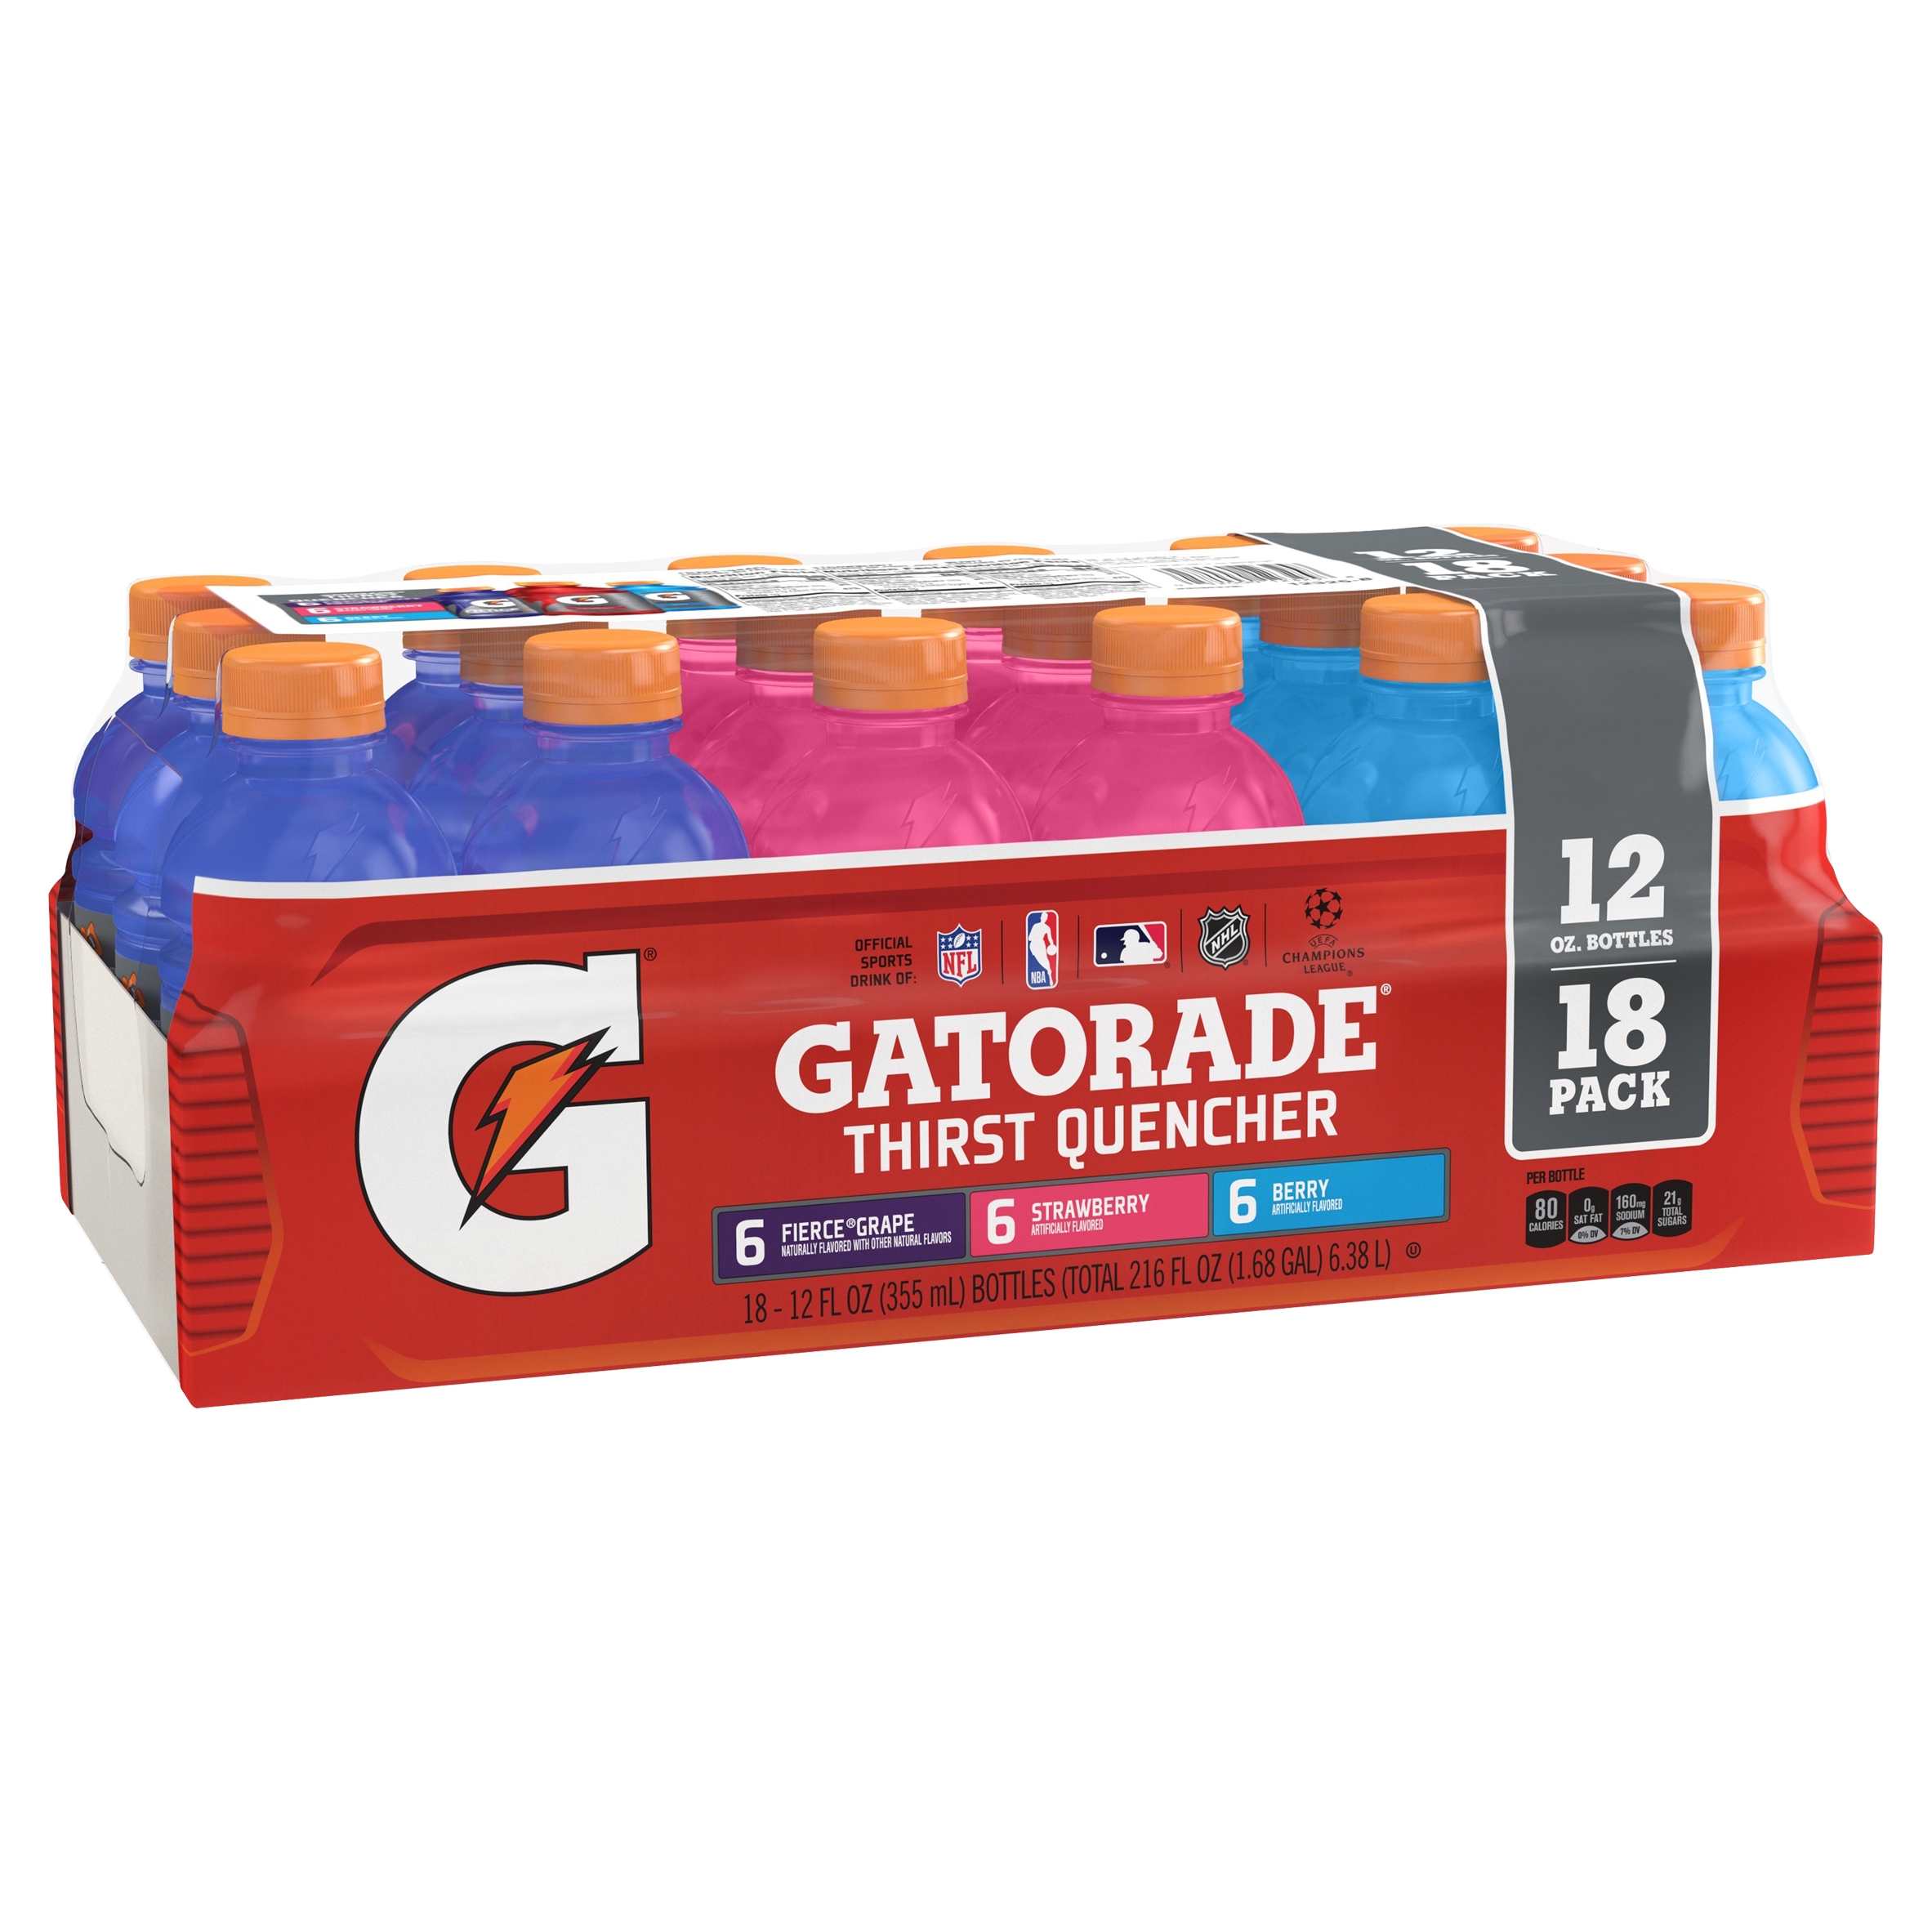 Gatorade Thirst Quencher Variety Pack, Grape/Strawberry/Berry Sports Drinks, 12 fl oz, 18 Ct Bottles - image 2 of 12